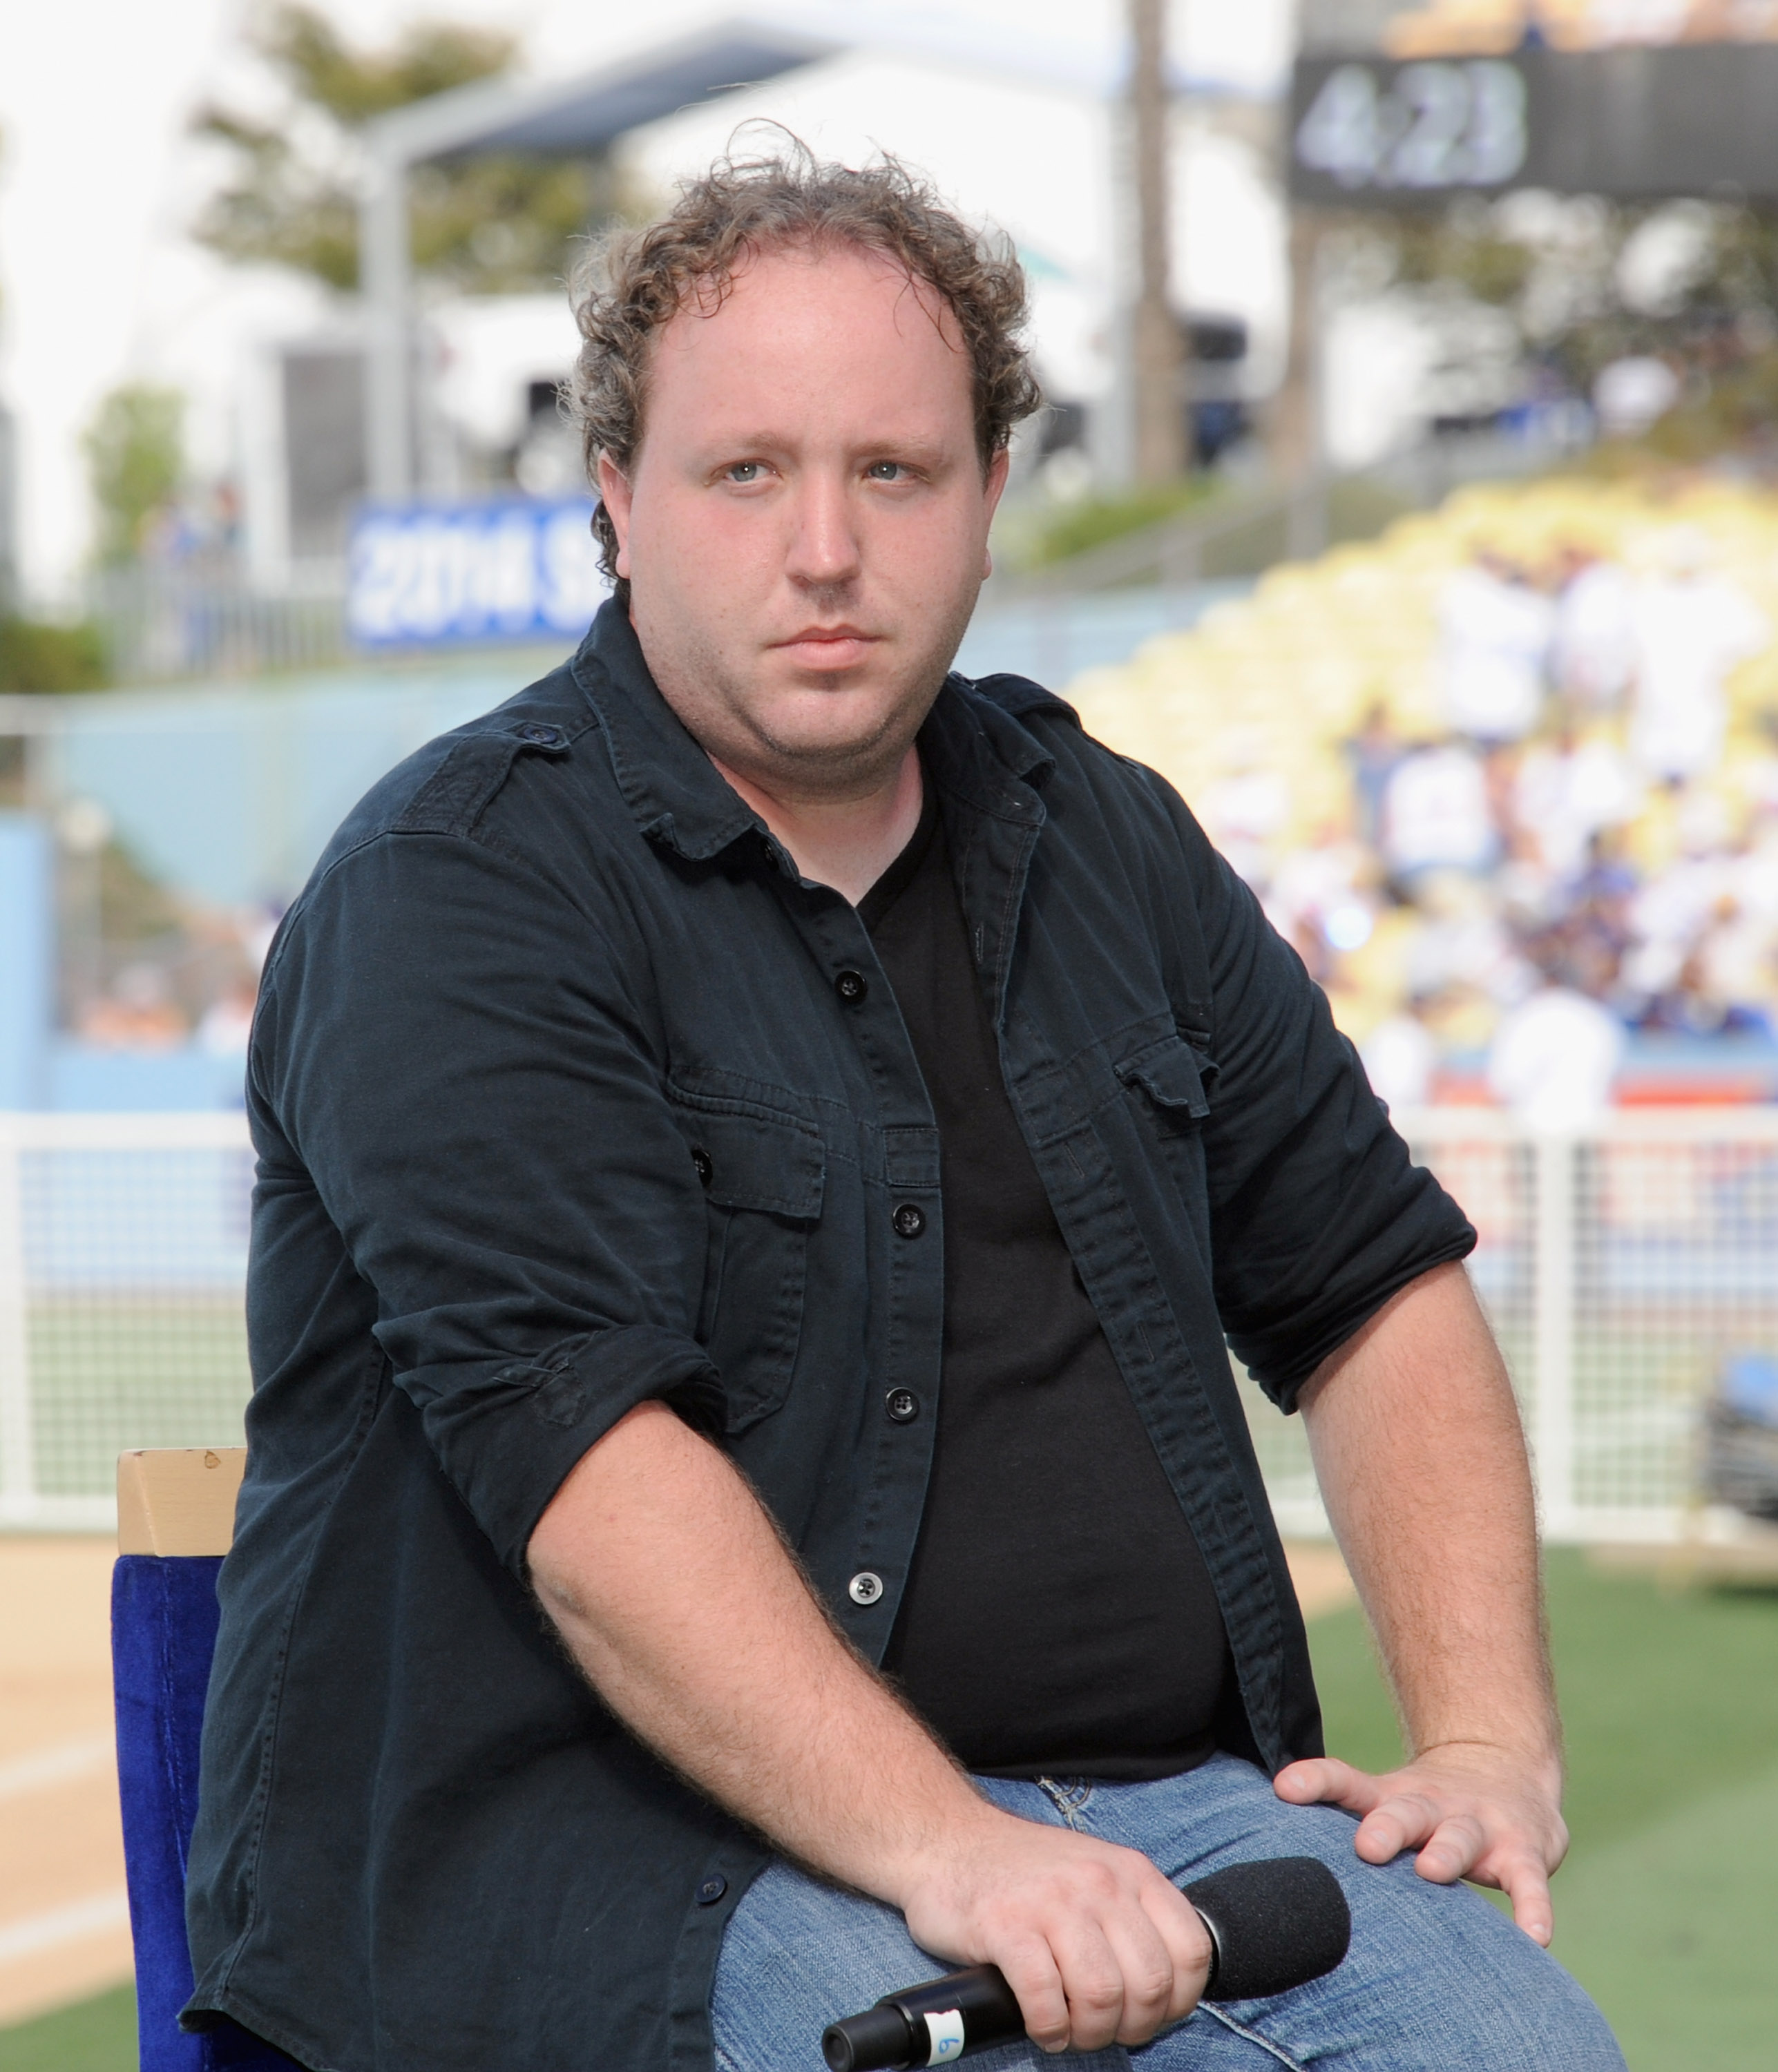 Shane Obedzinski on the field before the screening of "Sandlot" and following the MLB game between the San Diego Padres and Los Angeles Dodgers at Dodger Stadium on September 1, 2013, in Los Angeles, California | Source: Getty Images